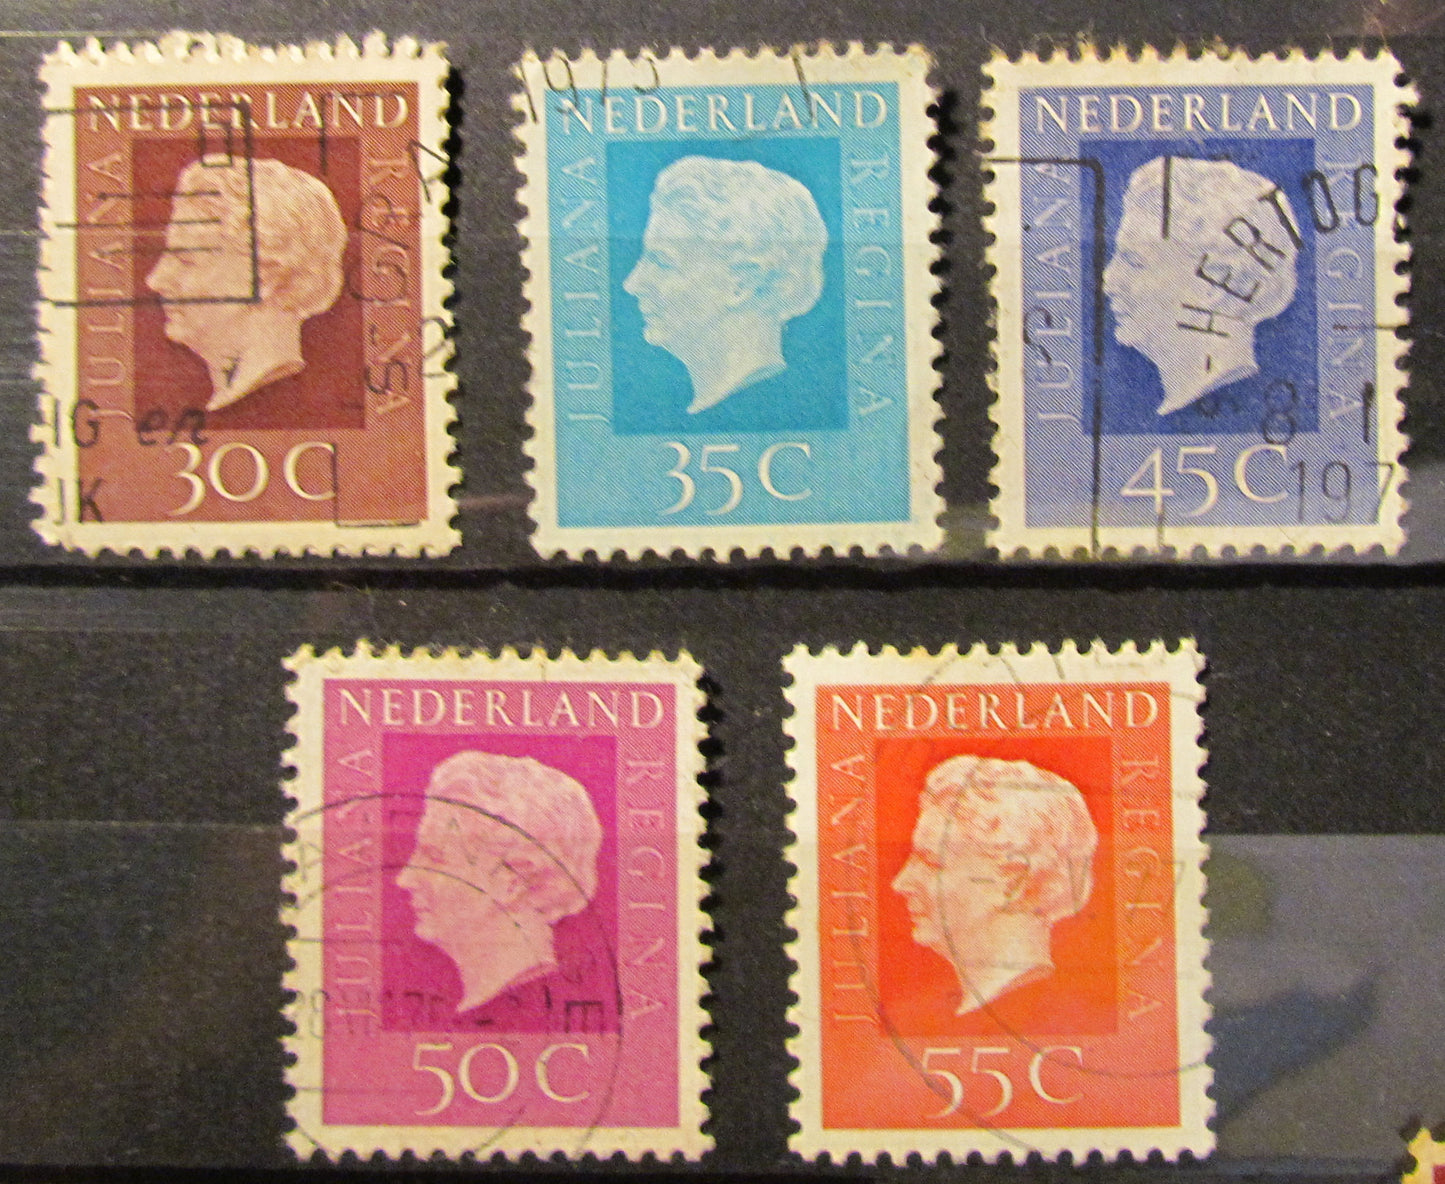 Dutch Netherlands 1969 Queen Juliana Small Format Format Stamp Group (5) Cancelled